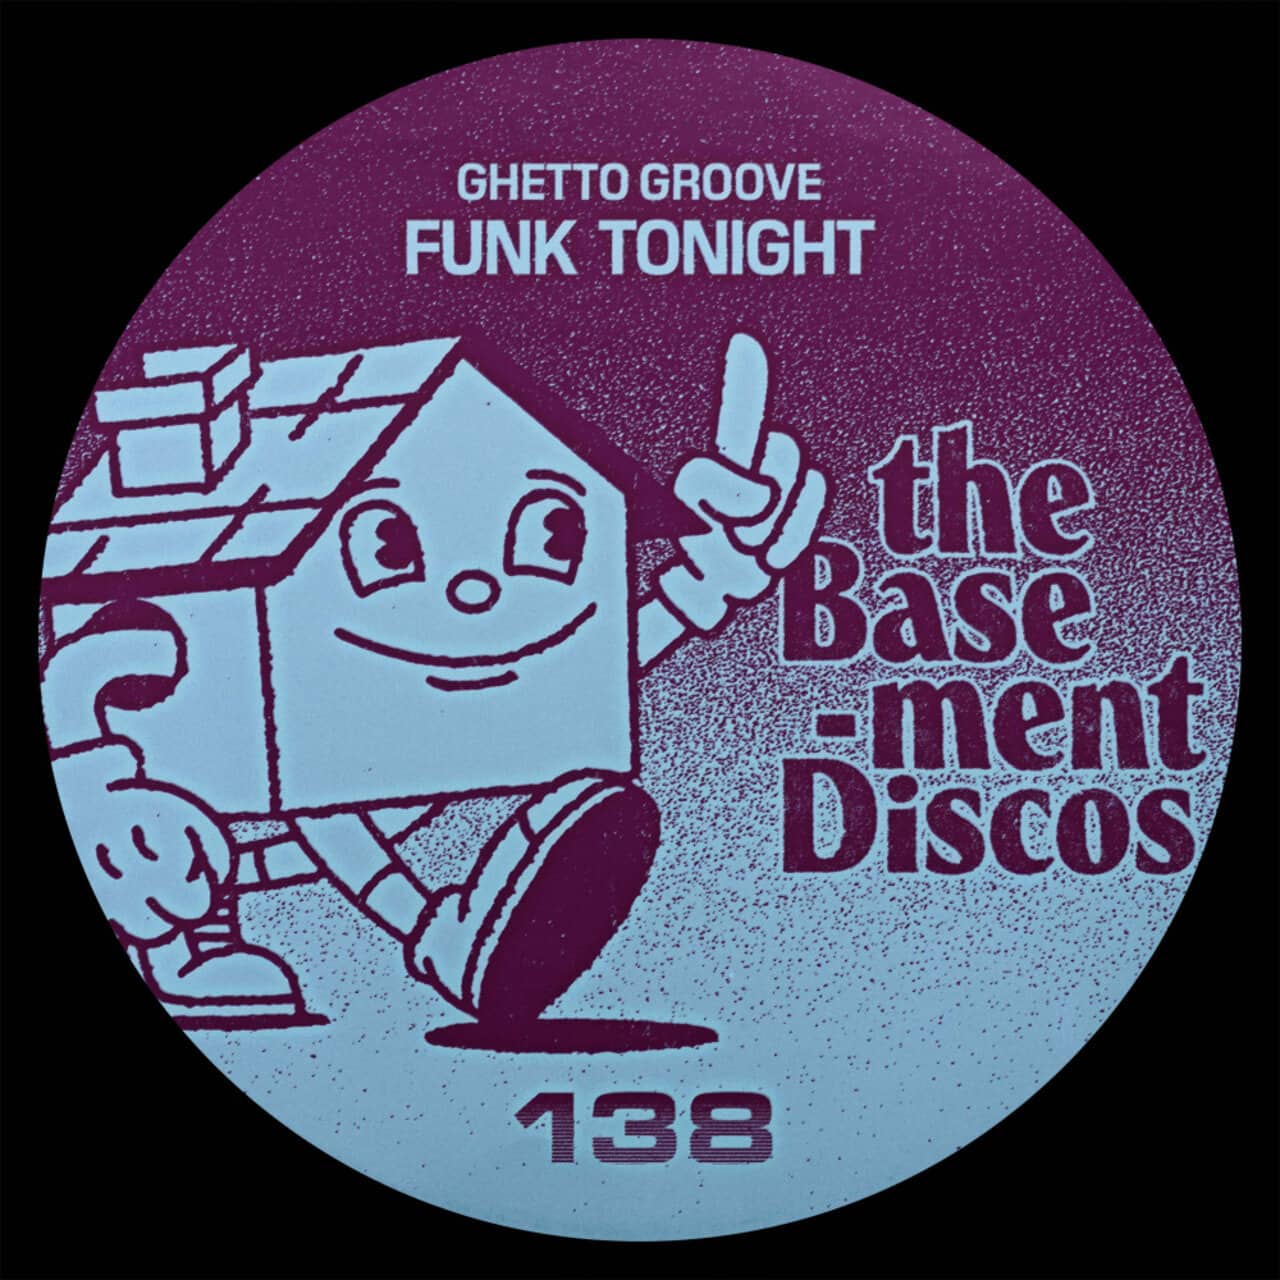 image cover: Ghetto Groove - Funk Tonight by theBasement Discos